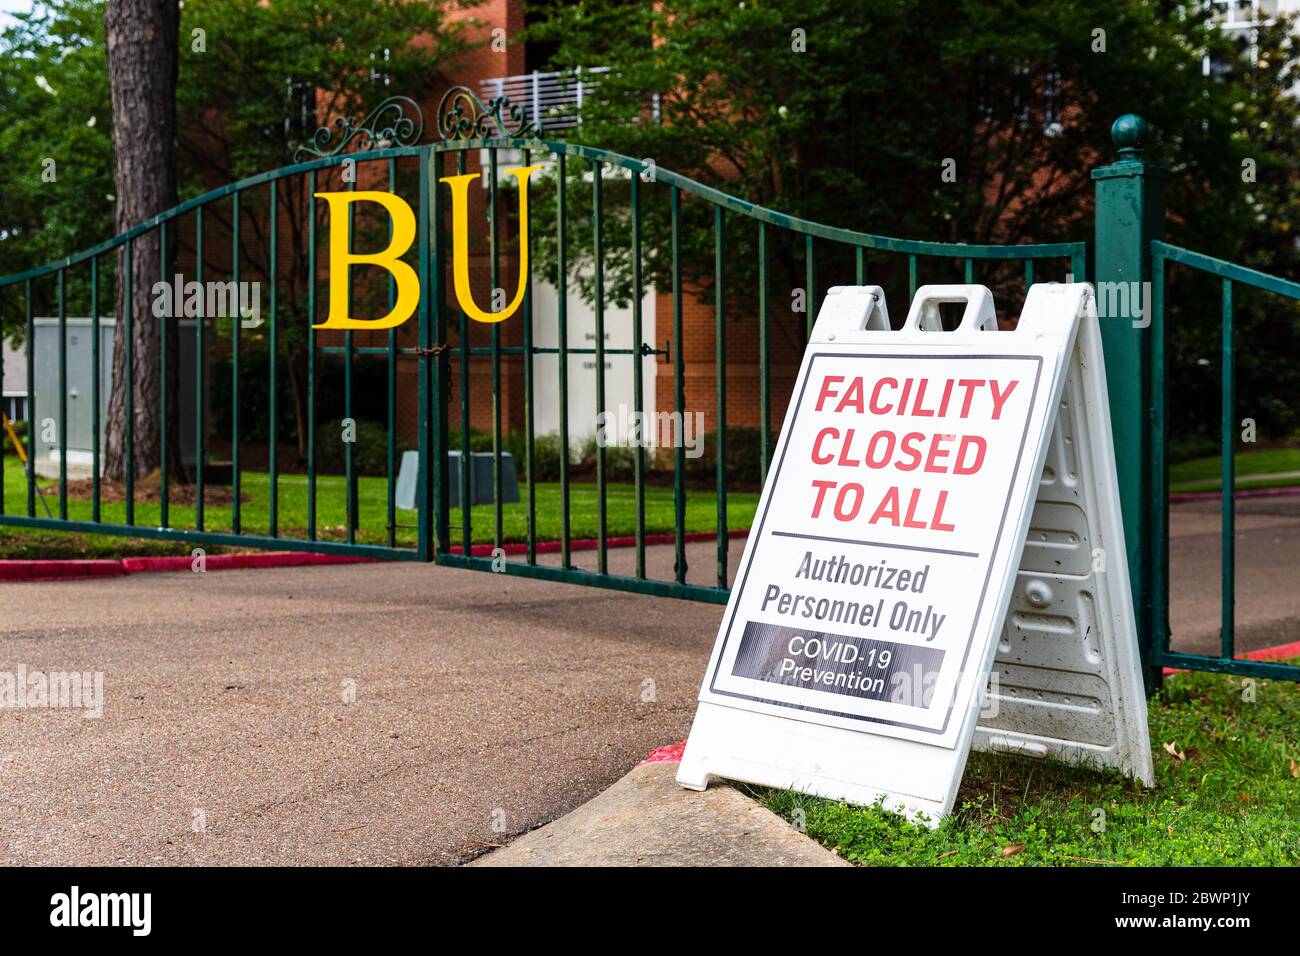 Jackson, MS / USA, June 1, 2020: Closed sign due to the 2020 COVID-19 Pandemic at Belhaven University in Jackson, MS Stock Photo